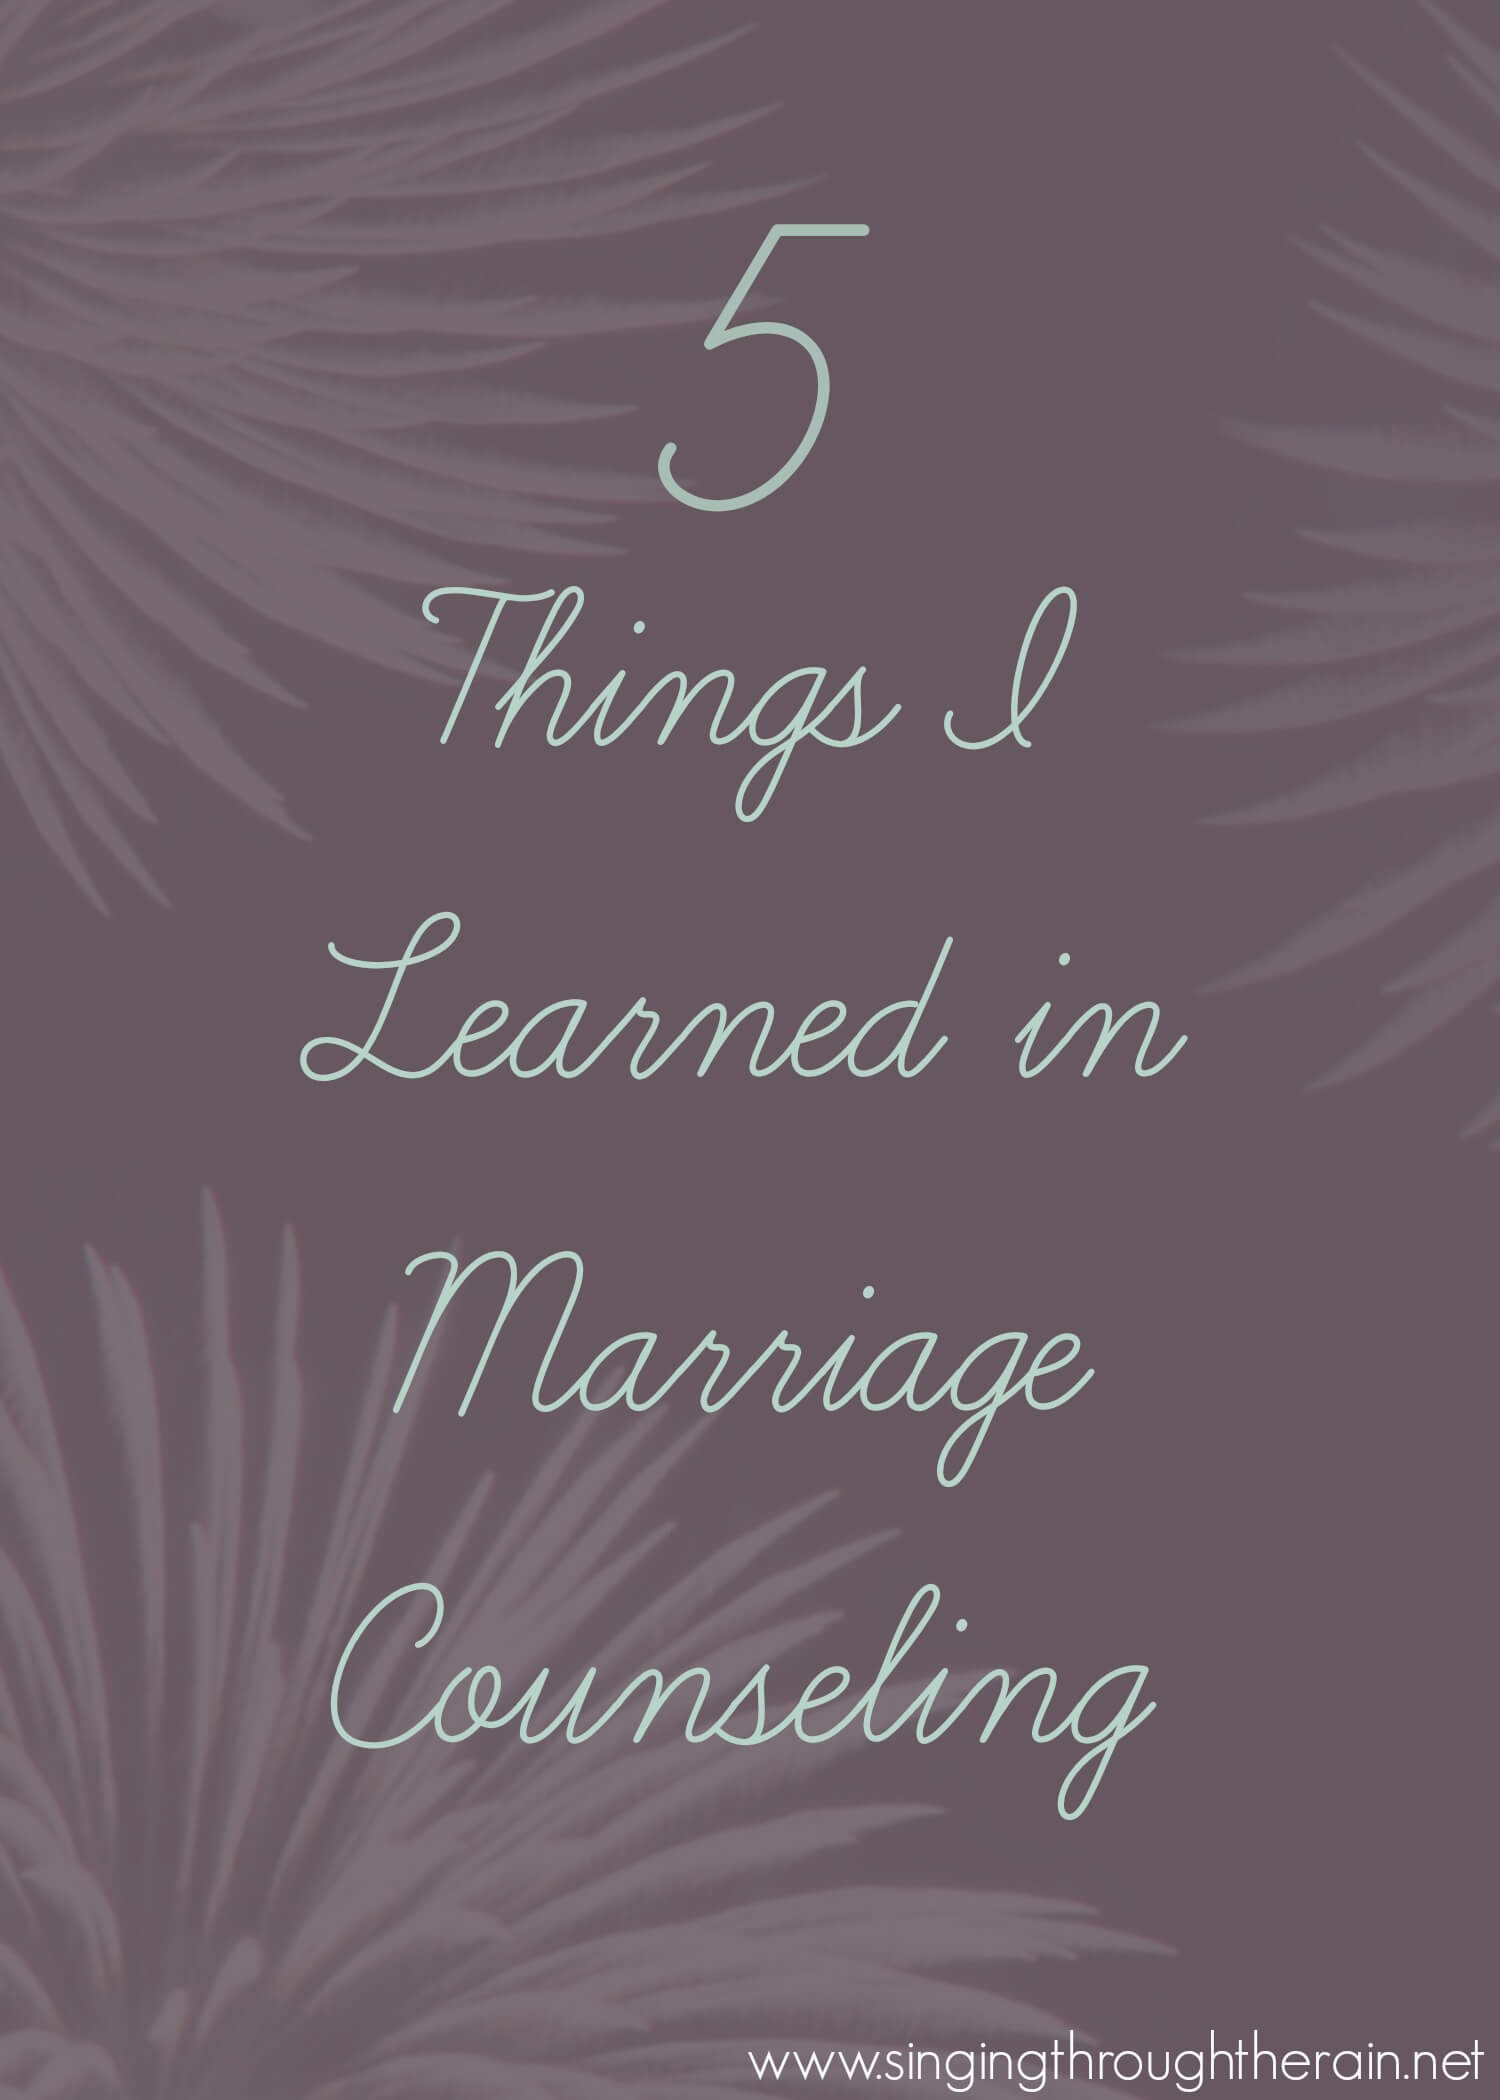 5 Things I Learned in Marriage Counseling